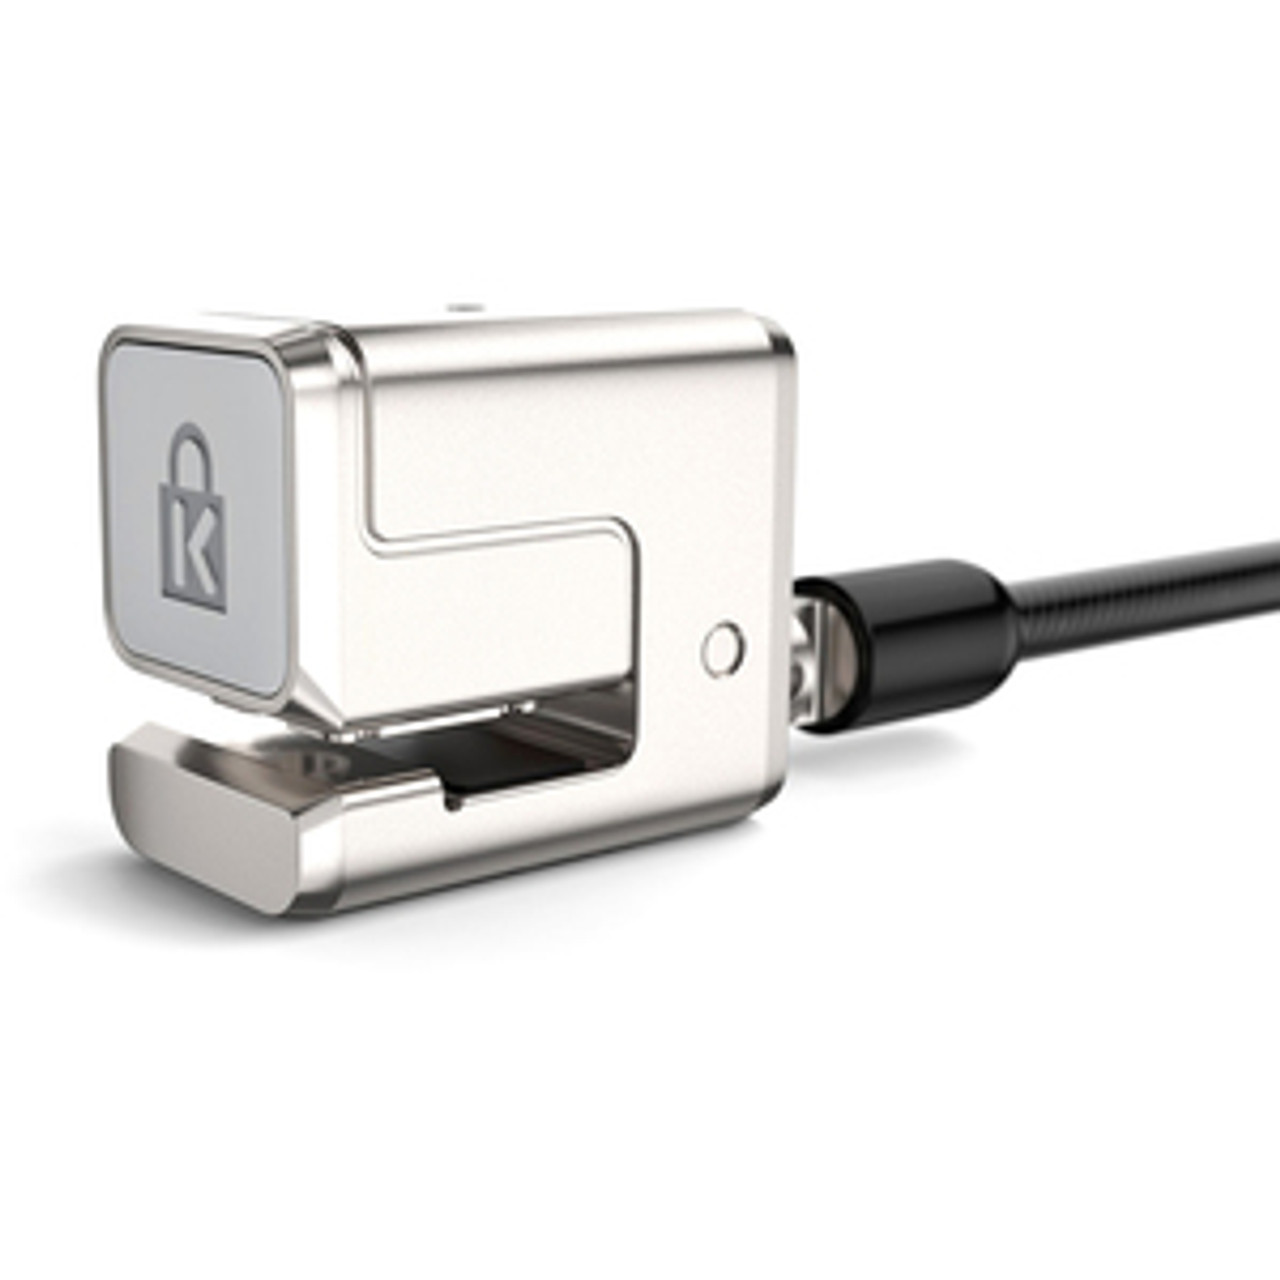 Kensington Keyed Cable Lock for Surface Pro & Surface Go - K64823US